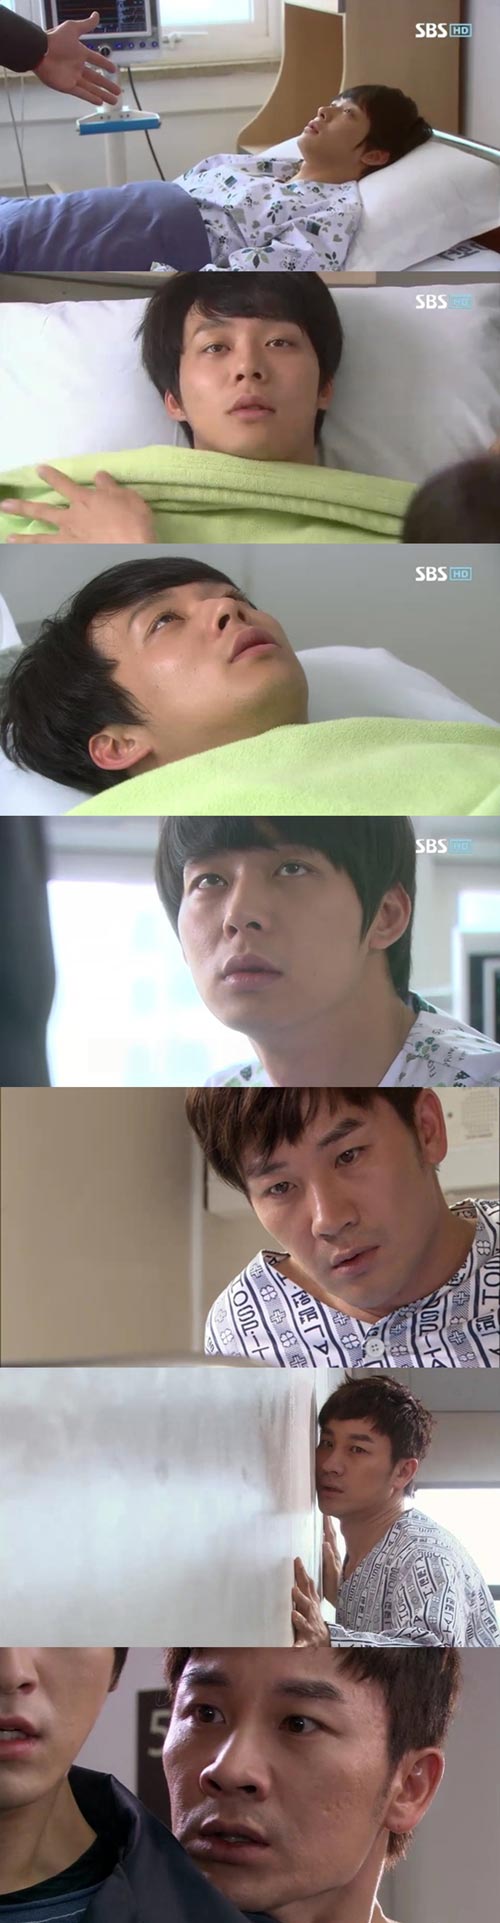 Pupil Acting of Yoochun A Challenge to Uhm Tae Woong